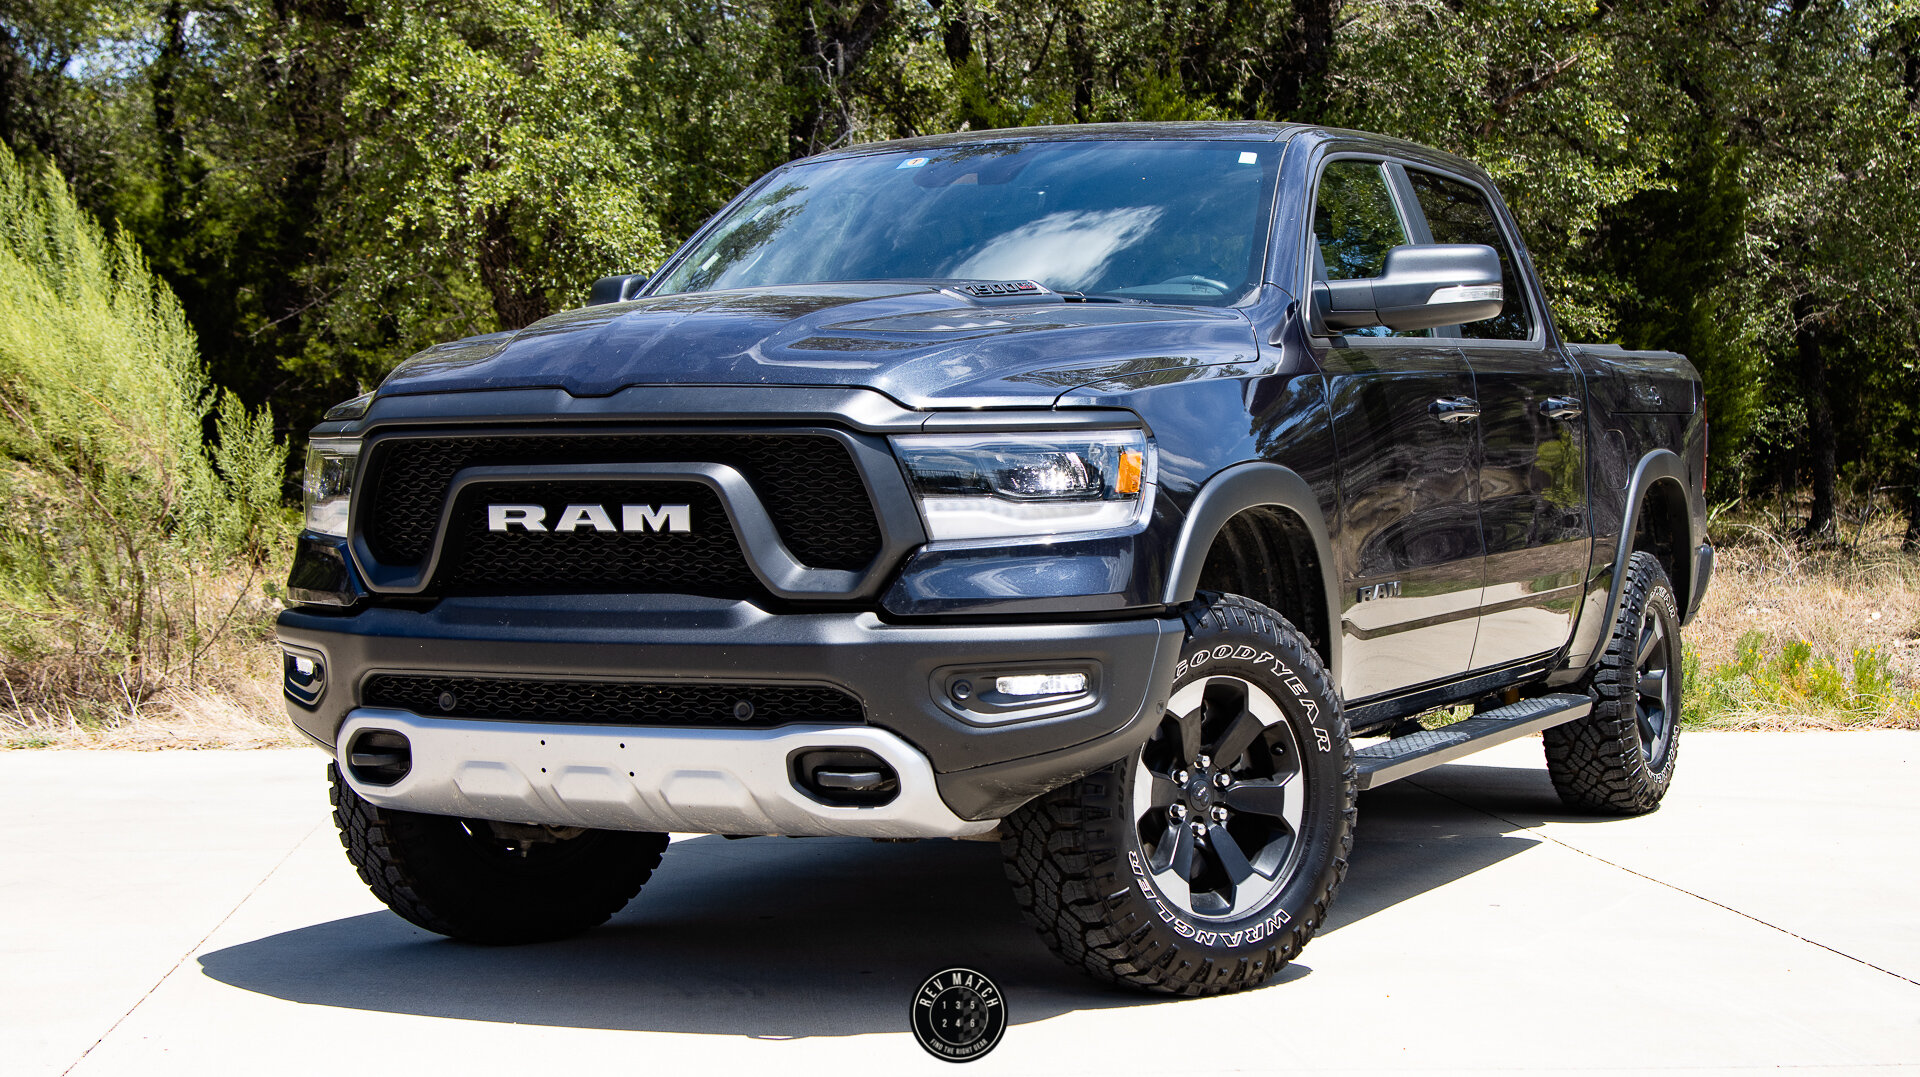 RAM Rebel EcoDiesel Review The New Family Vehicle? — Rev Match Media